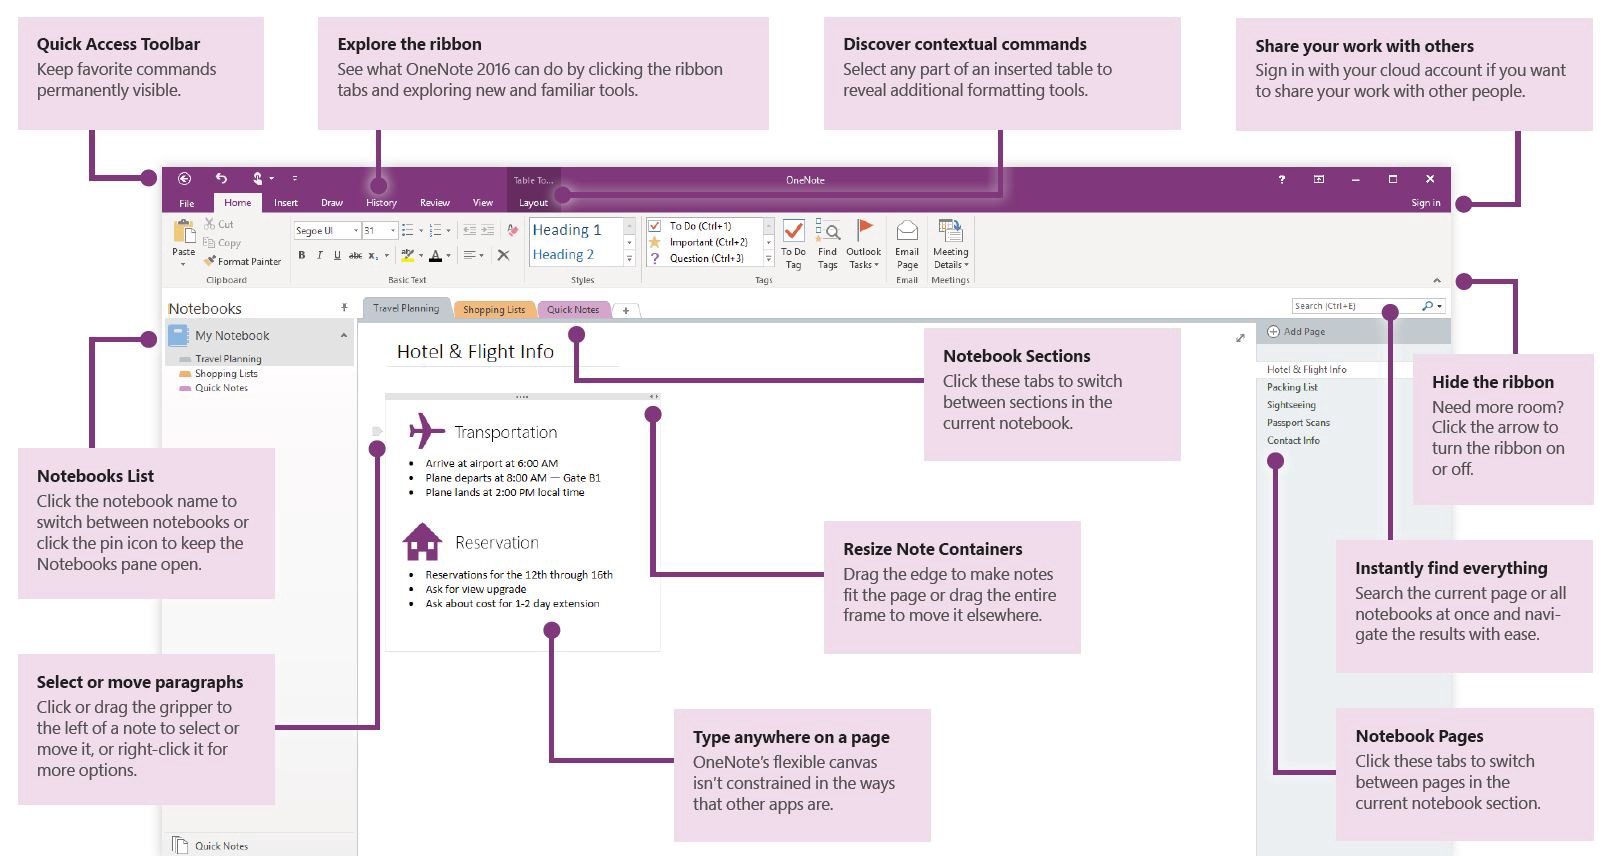 onenote meeting minutes template download